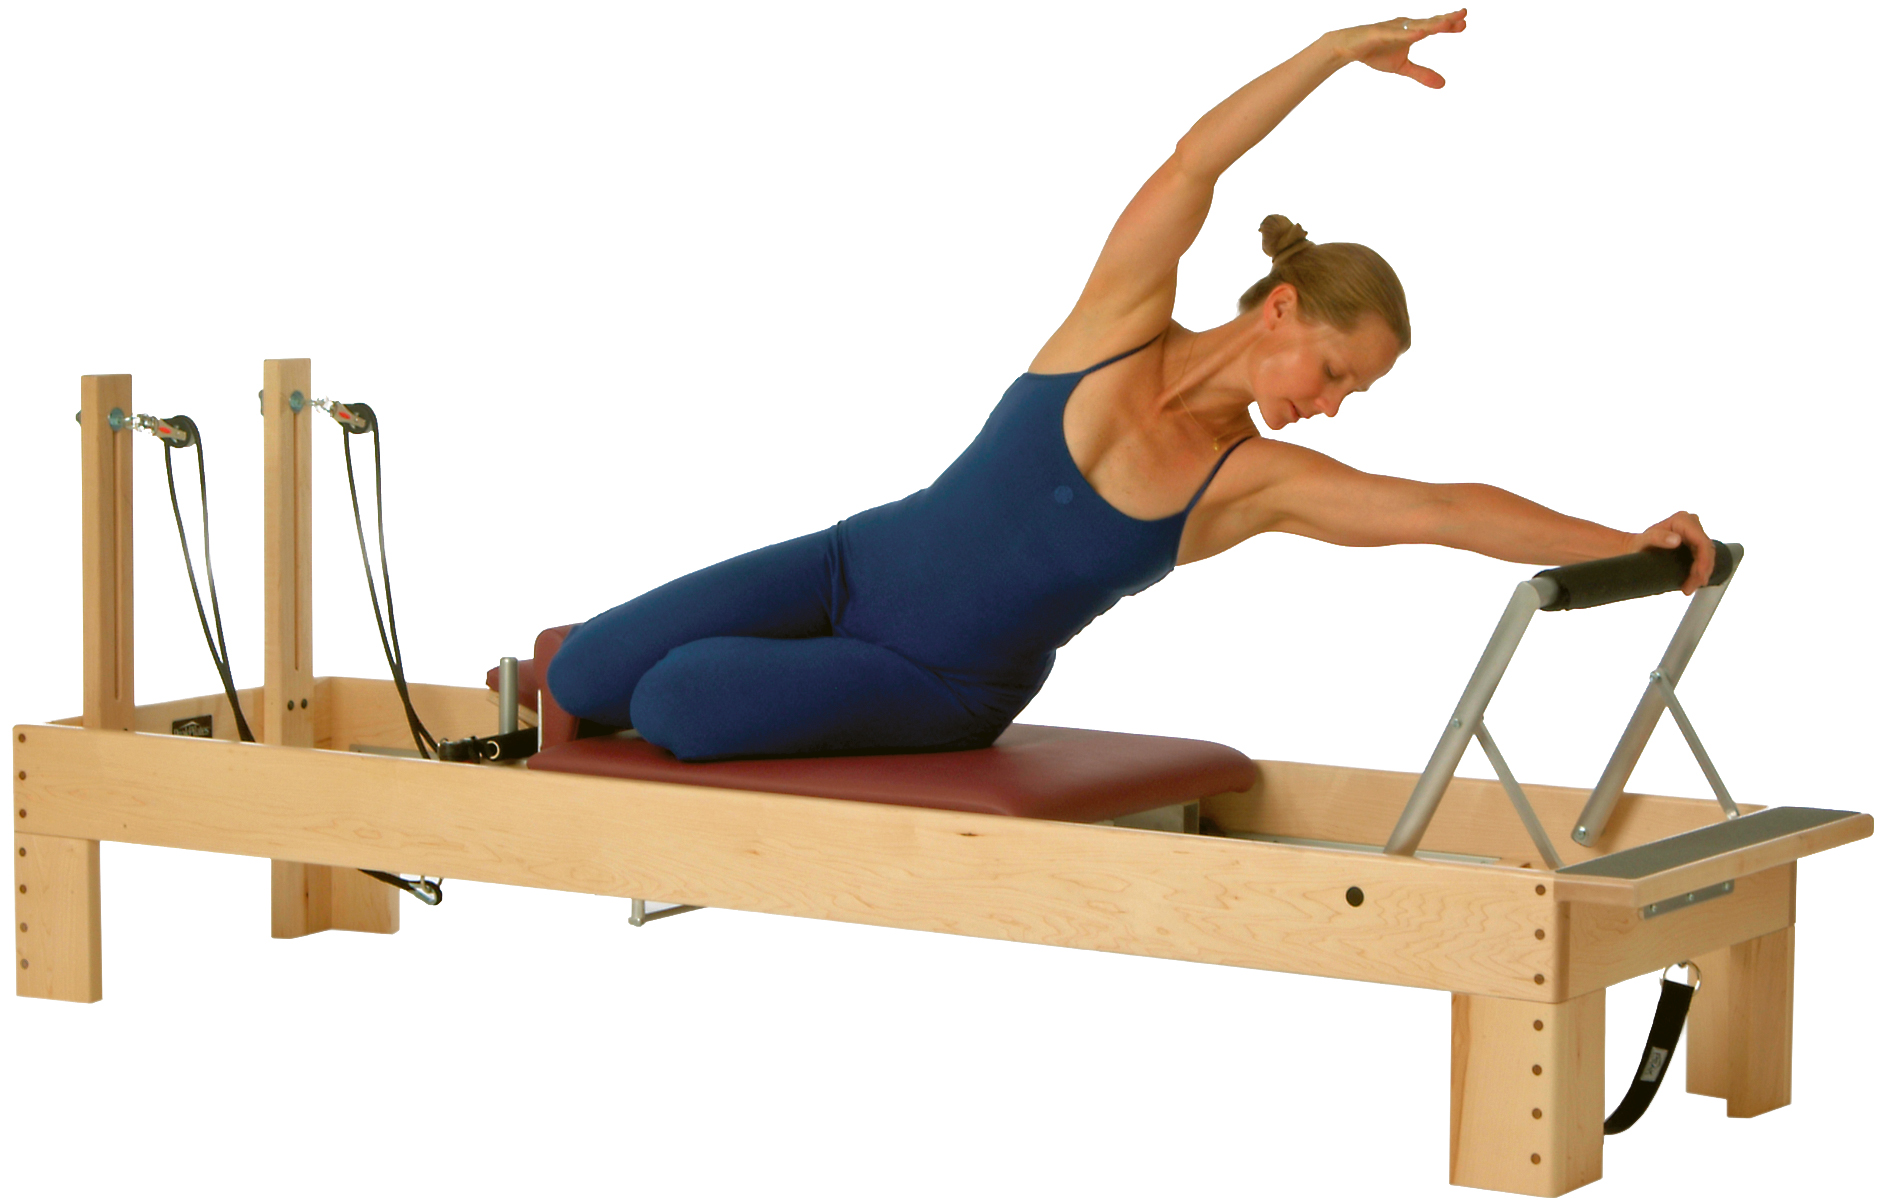 Pilates Fitness and Wellness 87 Purick St Suite #2, Blue Point New York 11715